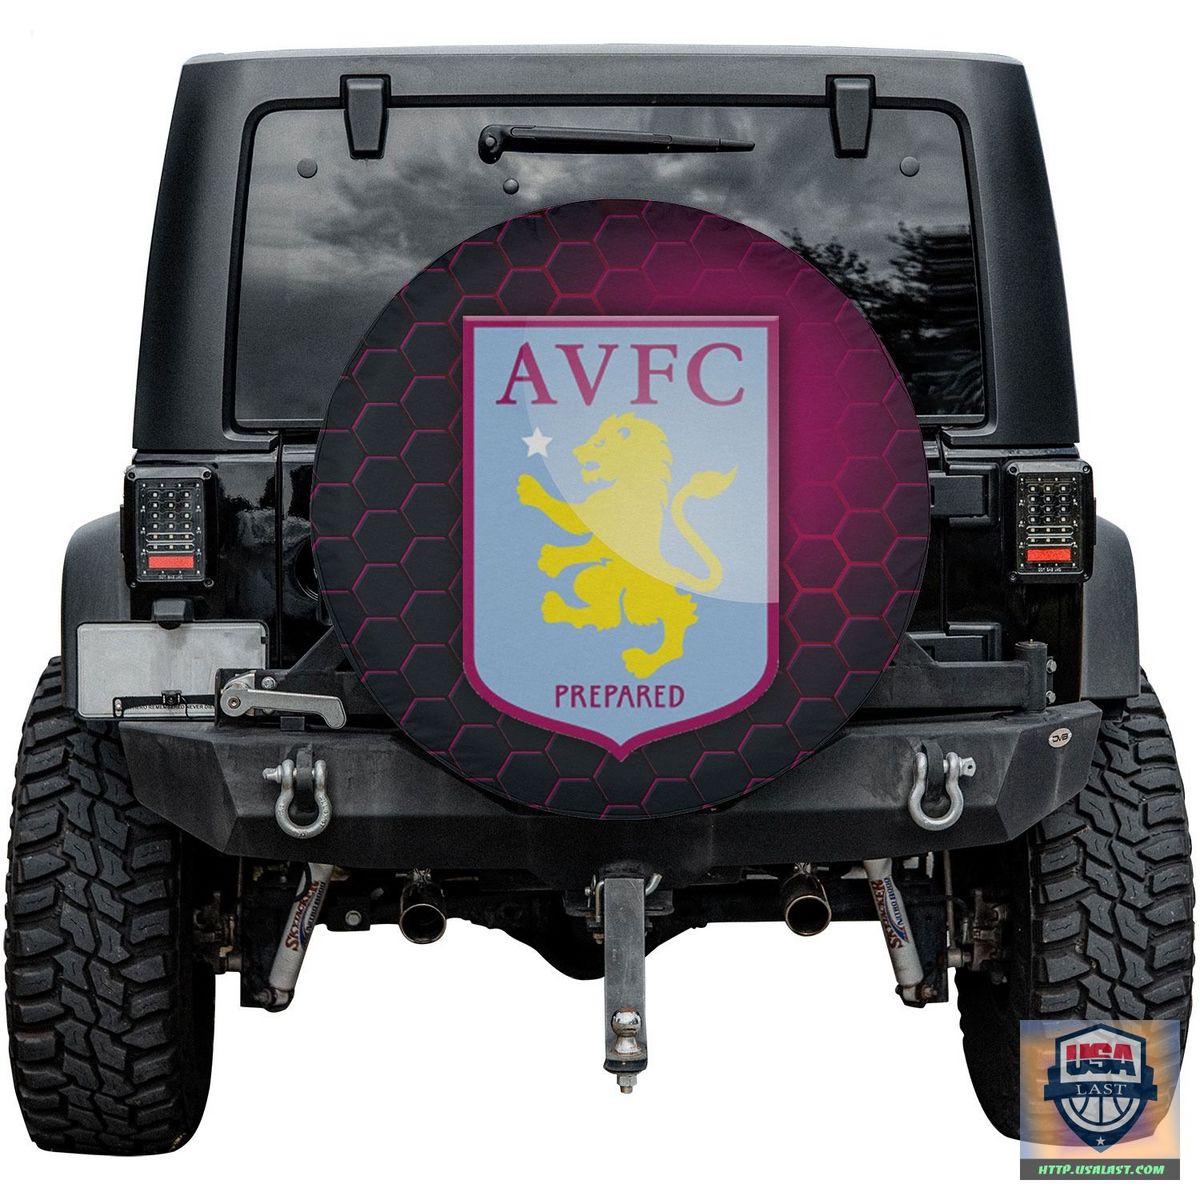 Aston Villa FC Spare Tire Cover - You are getting me envious with your look